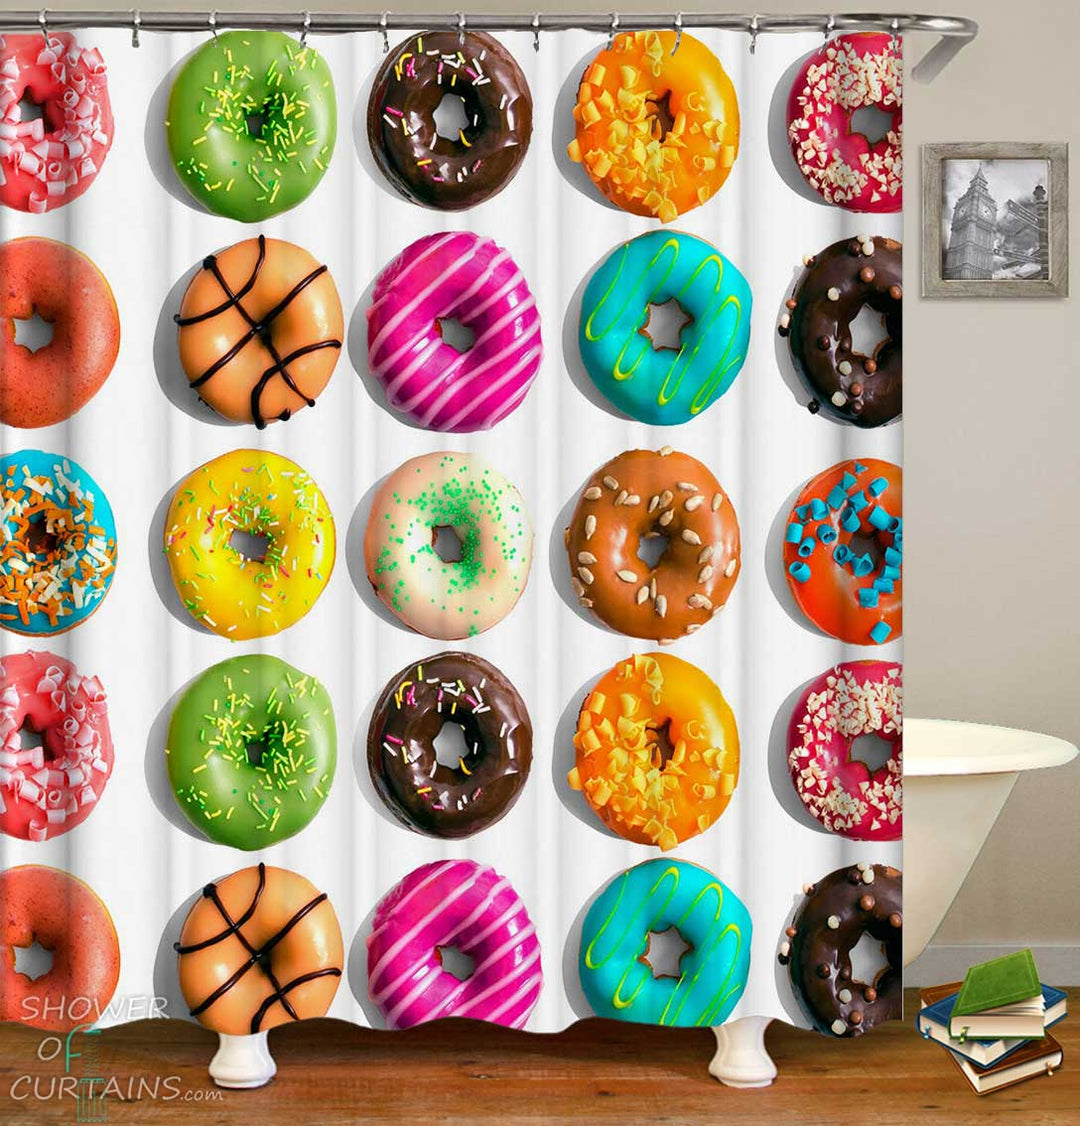 Shower Curtains with Colorful Tasty Doughnuts